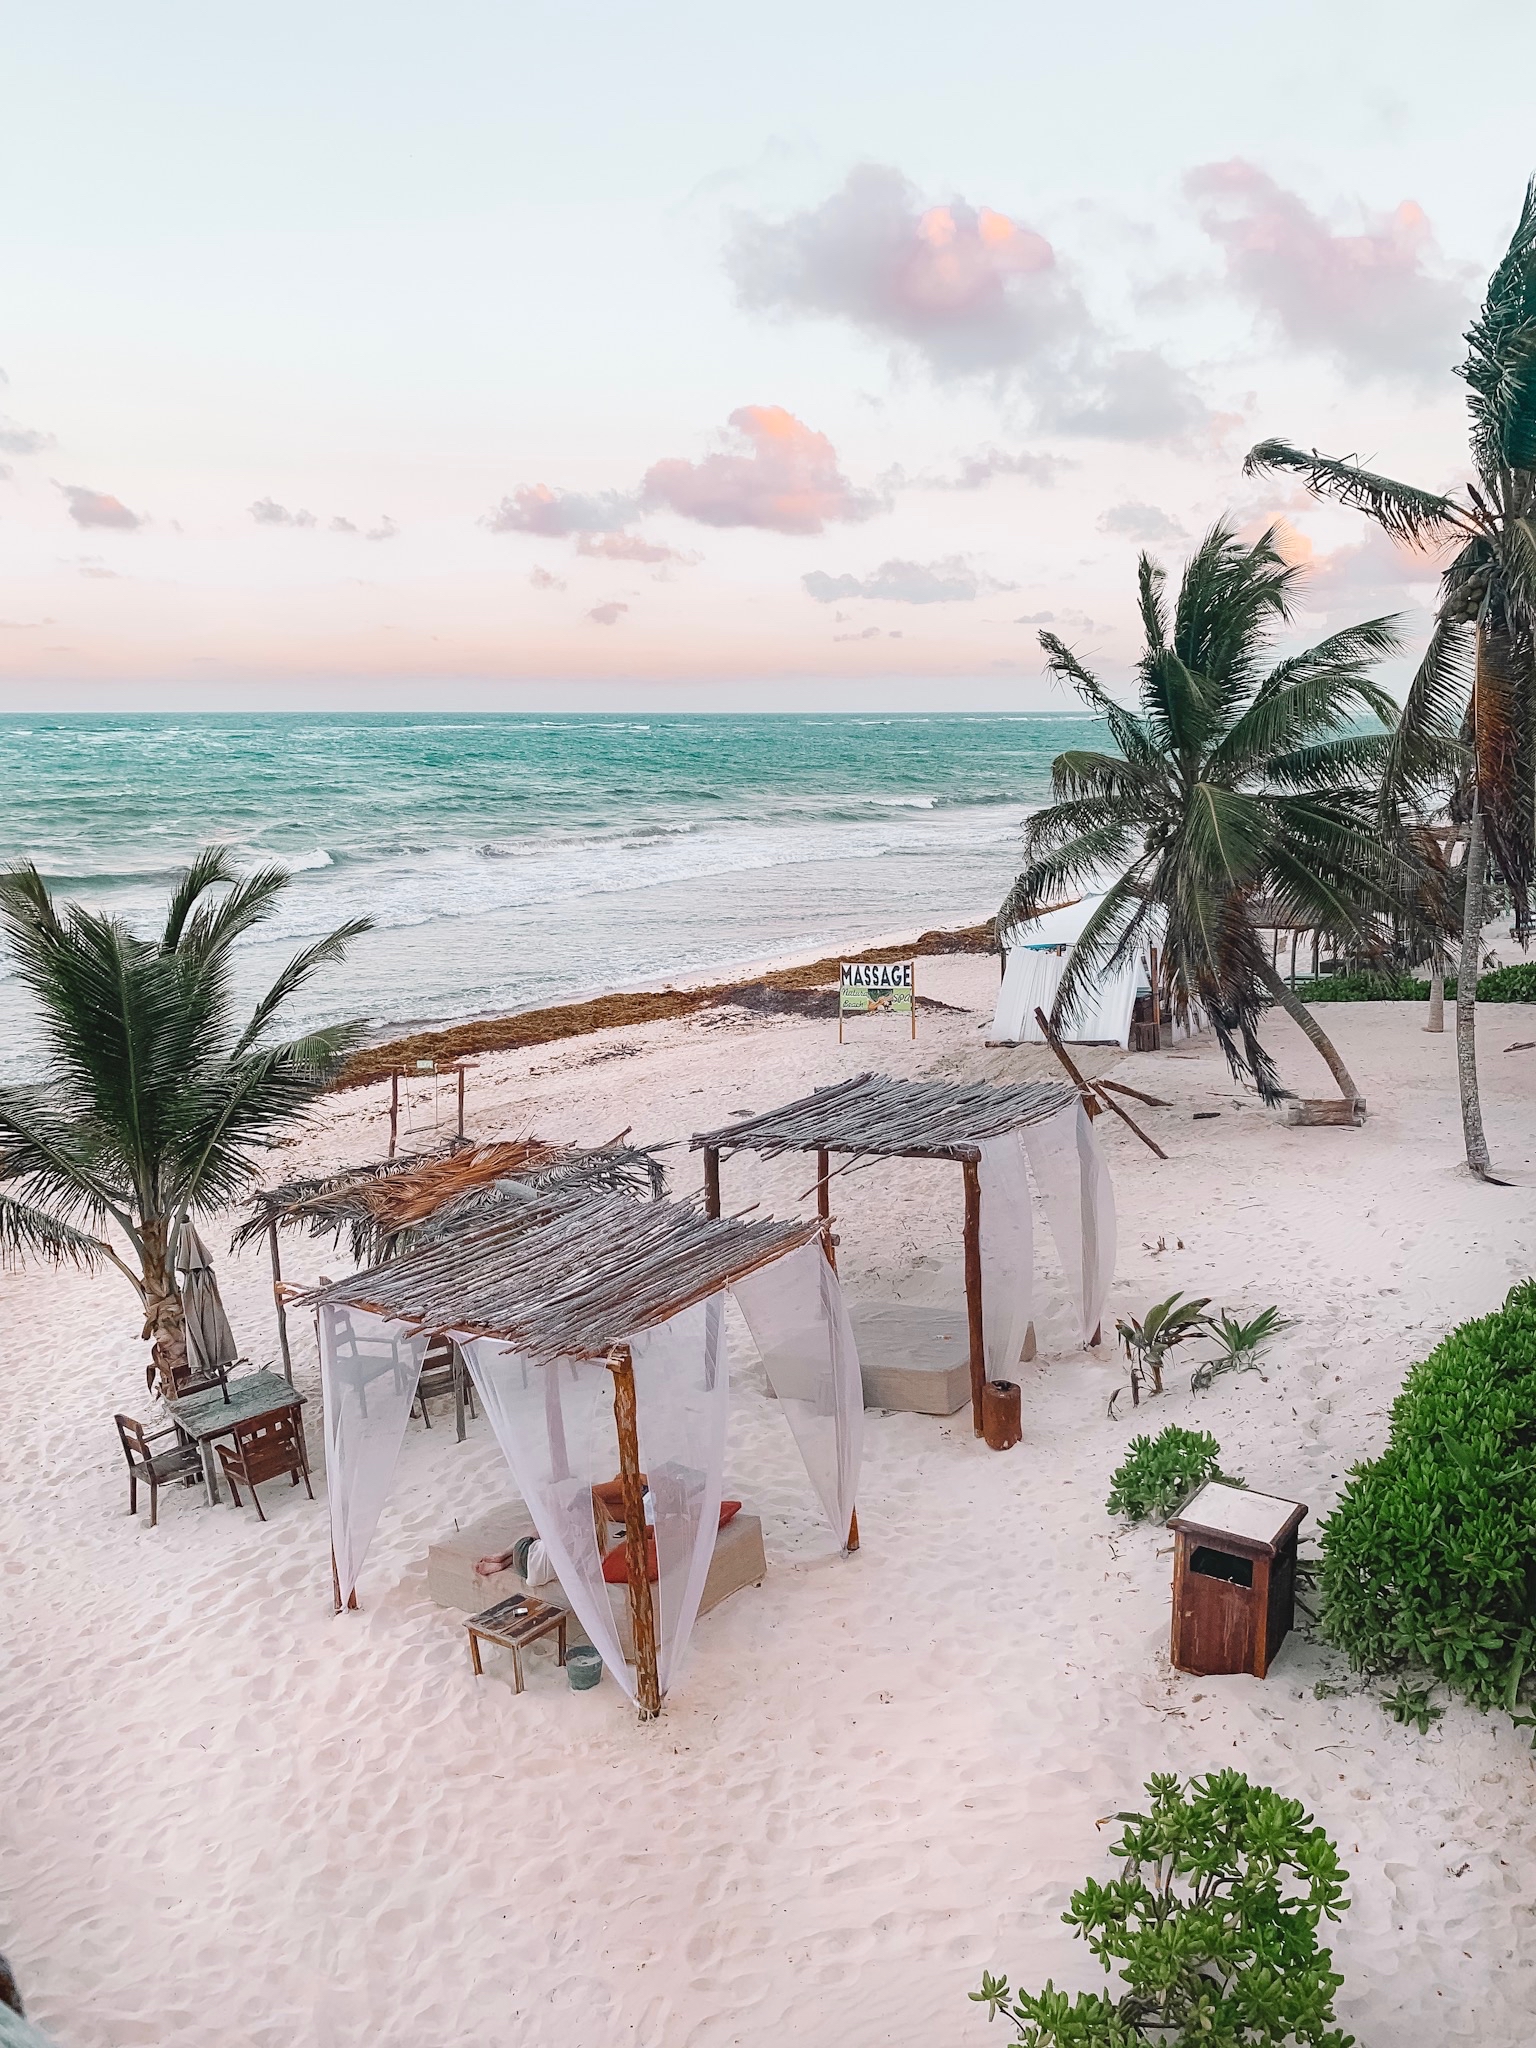 Tulum Travel Guide - Where to Stay Tulum Beach Hotels